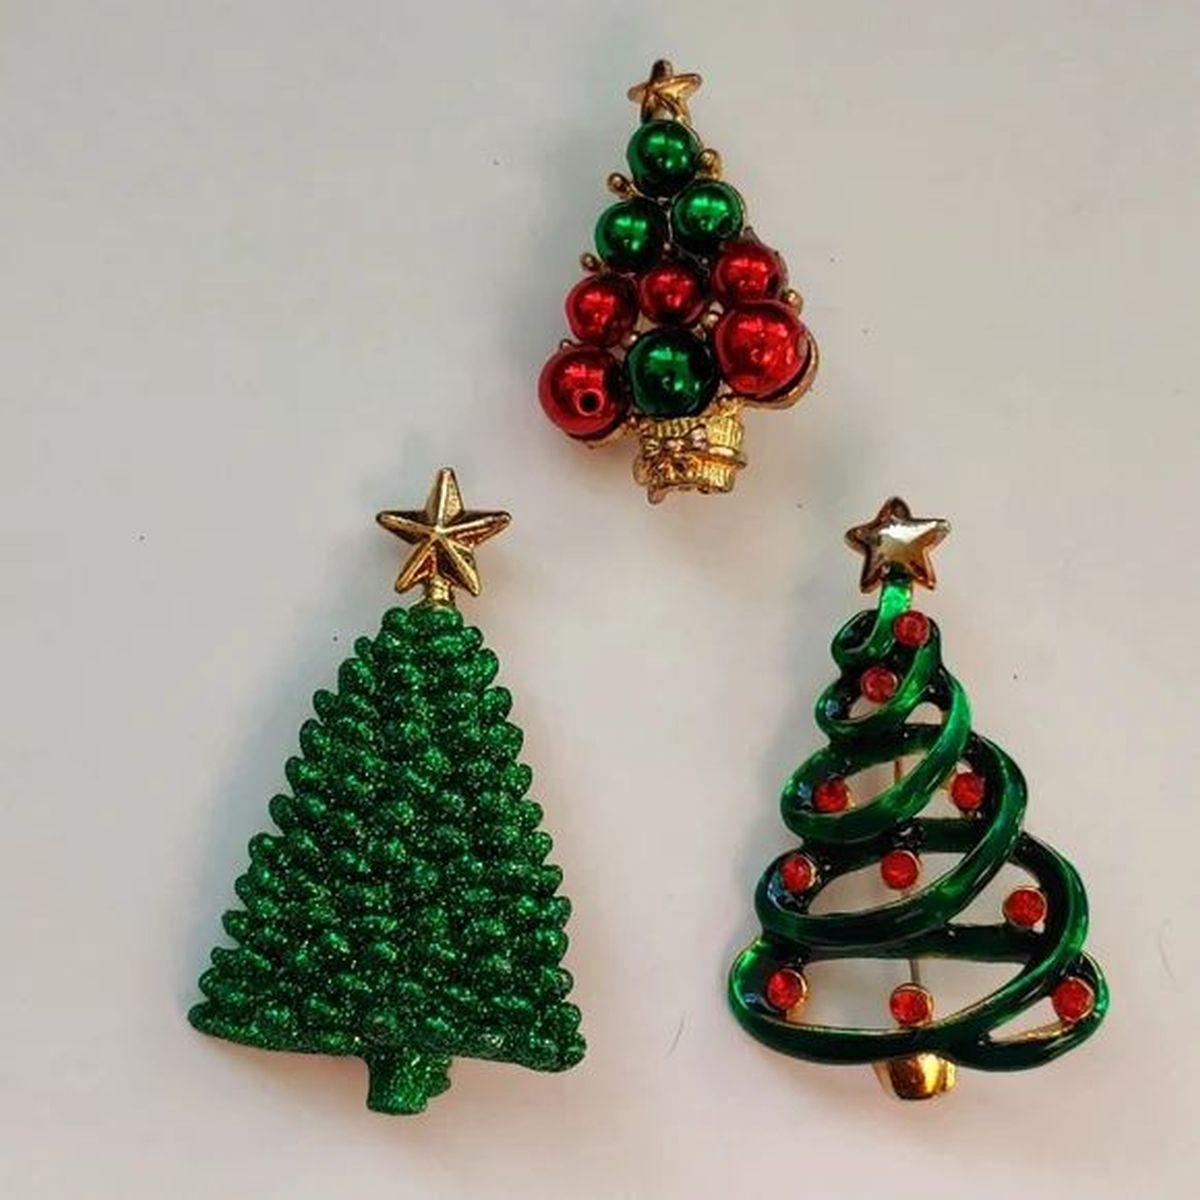 Simply Beautiful! Three Vintage Classic Multi Design Red and Green Gold-tone Ornamental Christmas Tree Holiday Brooches. More Beautiful in Real time! Great for gift giving! A Must Have for a Special Someone…Including You! Enjoy the Holidays! 